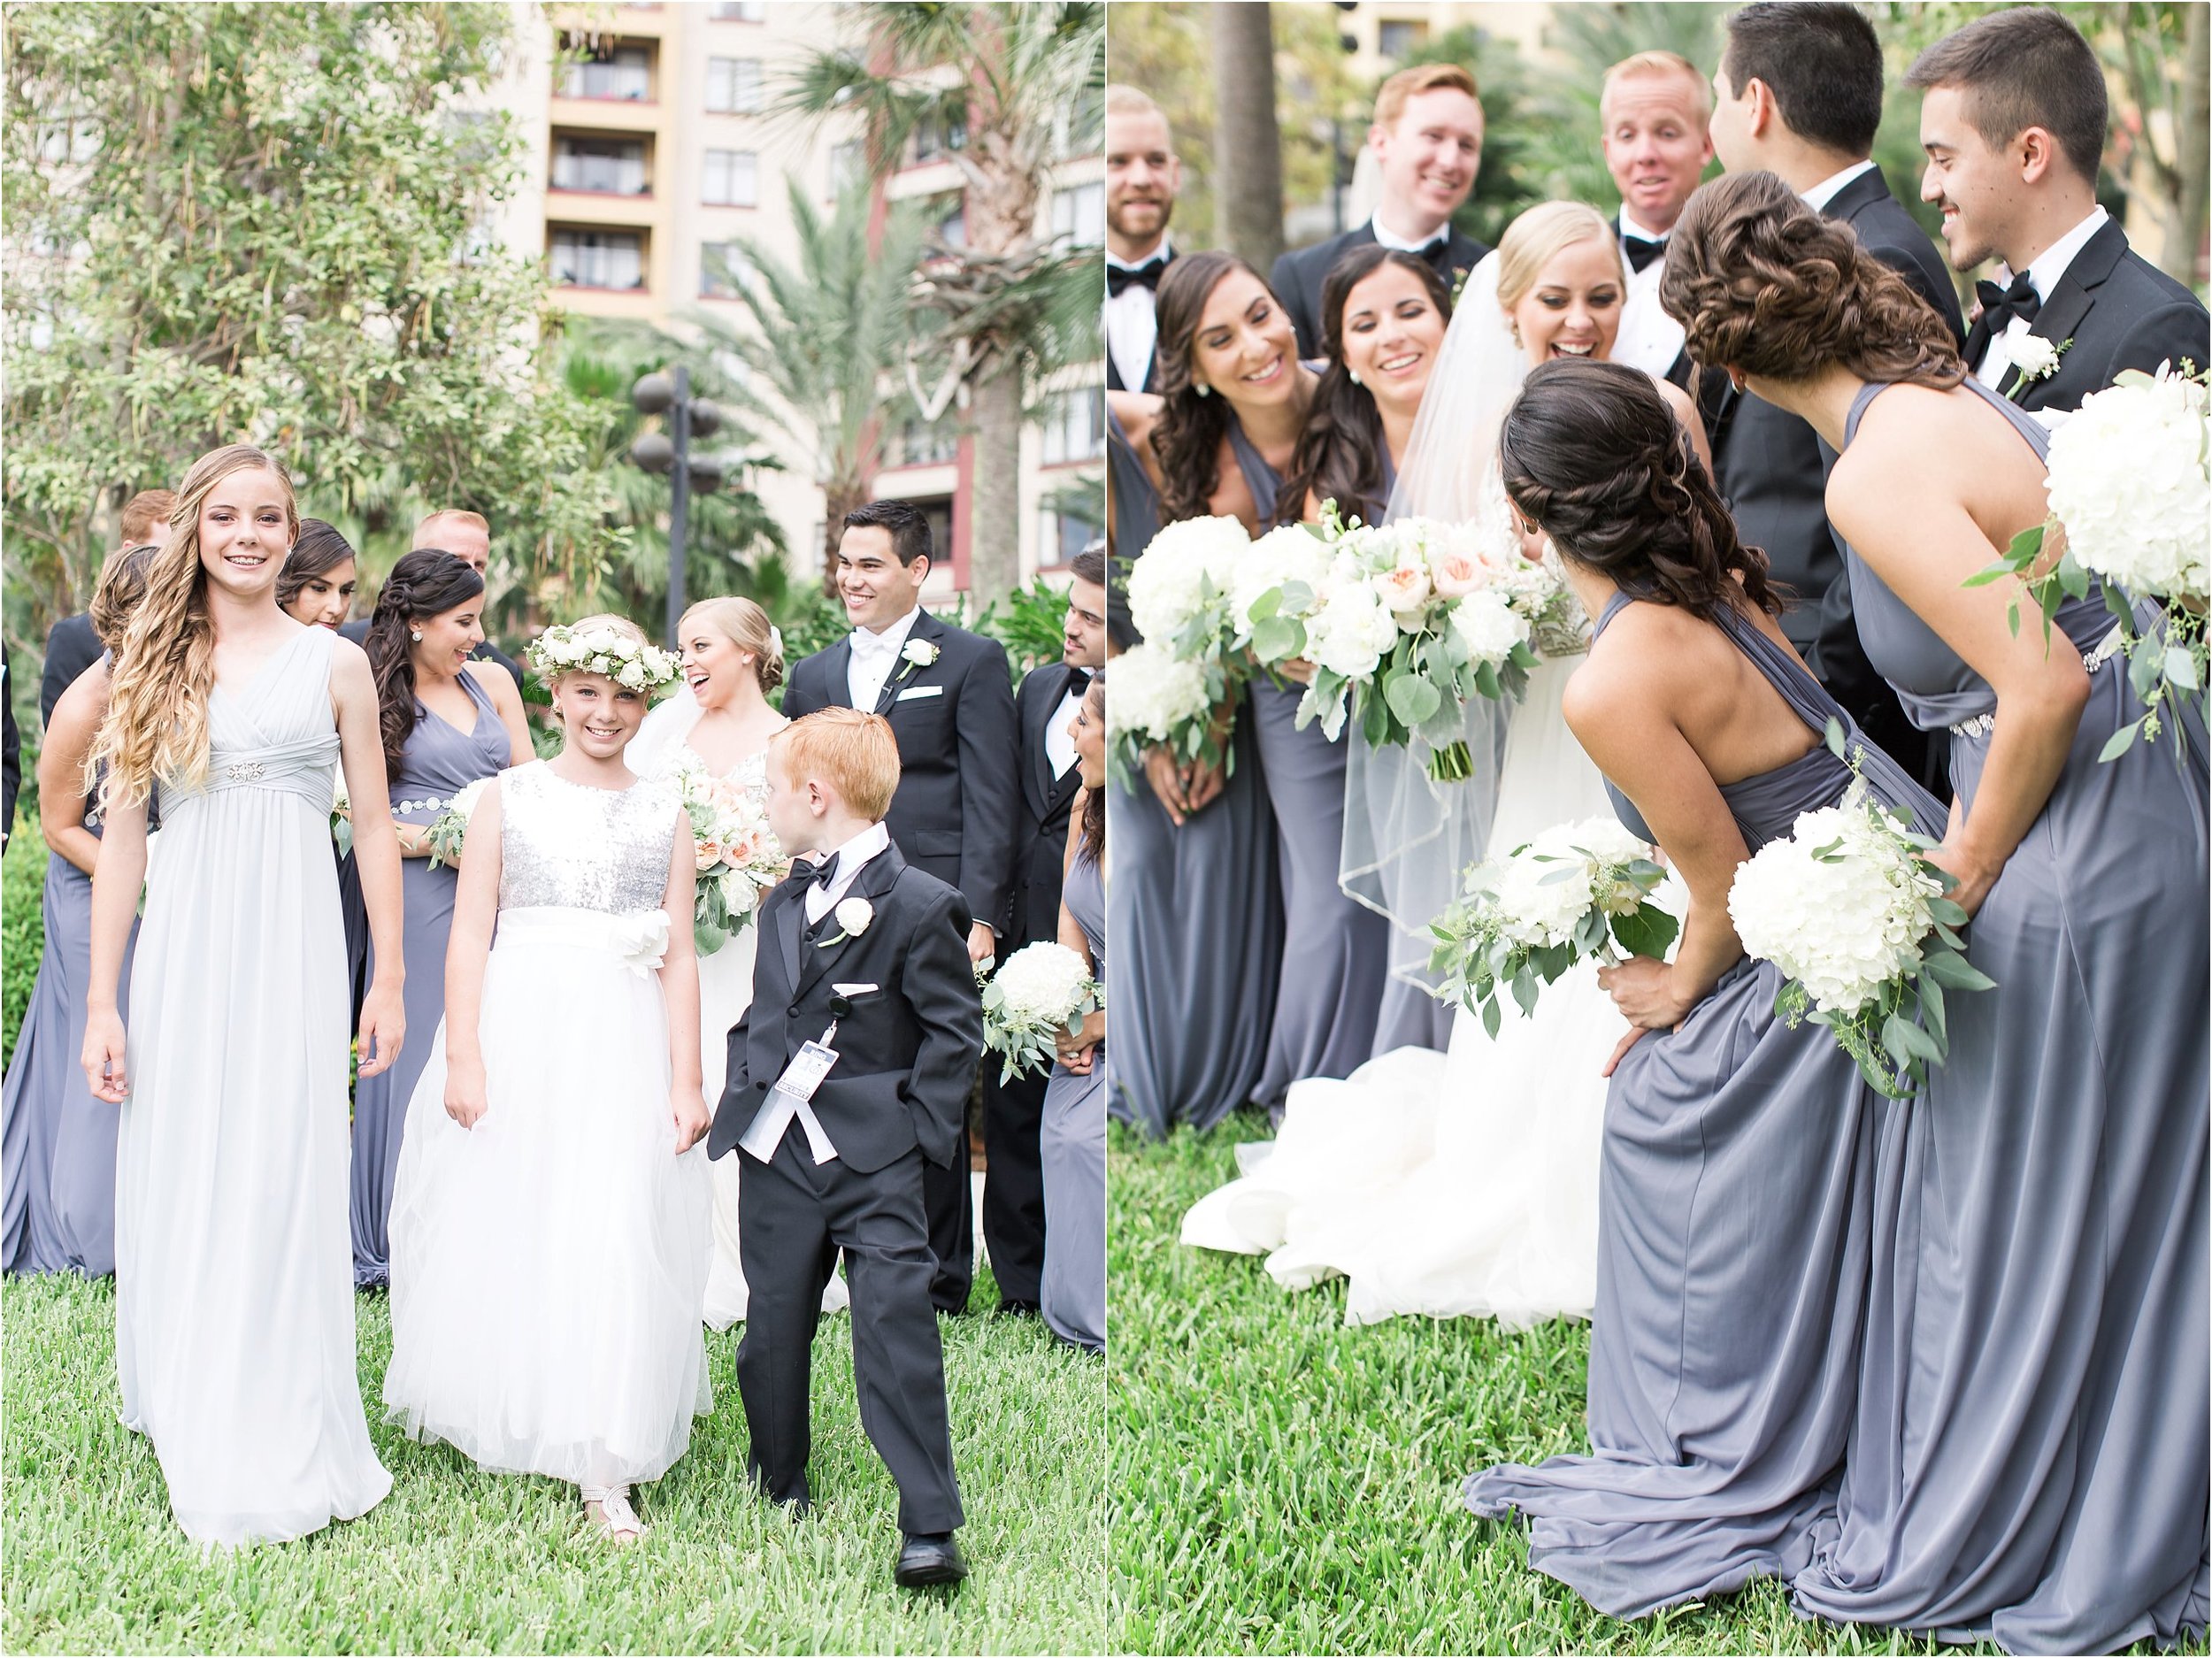 Grey white and black bridal party at Wyndham Grand at Bonnet Creek wedding by PSJ Photography 